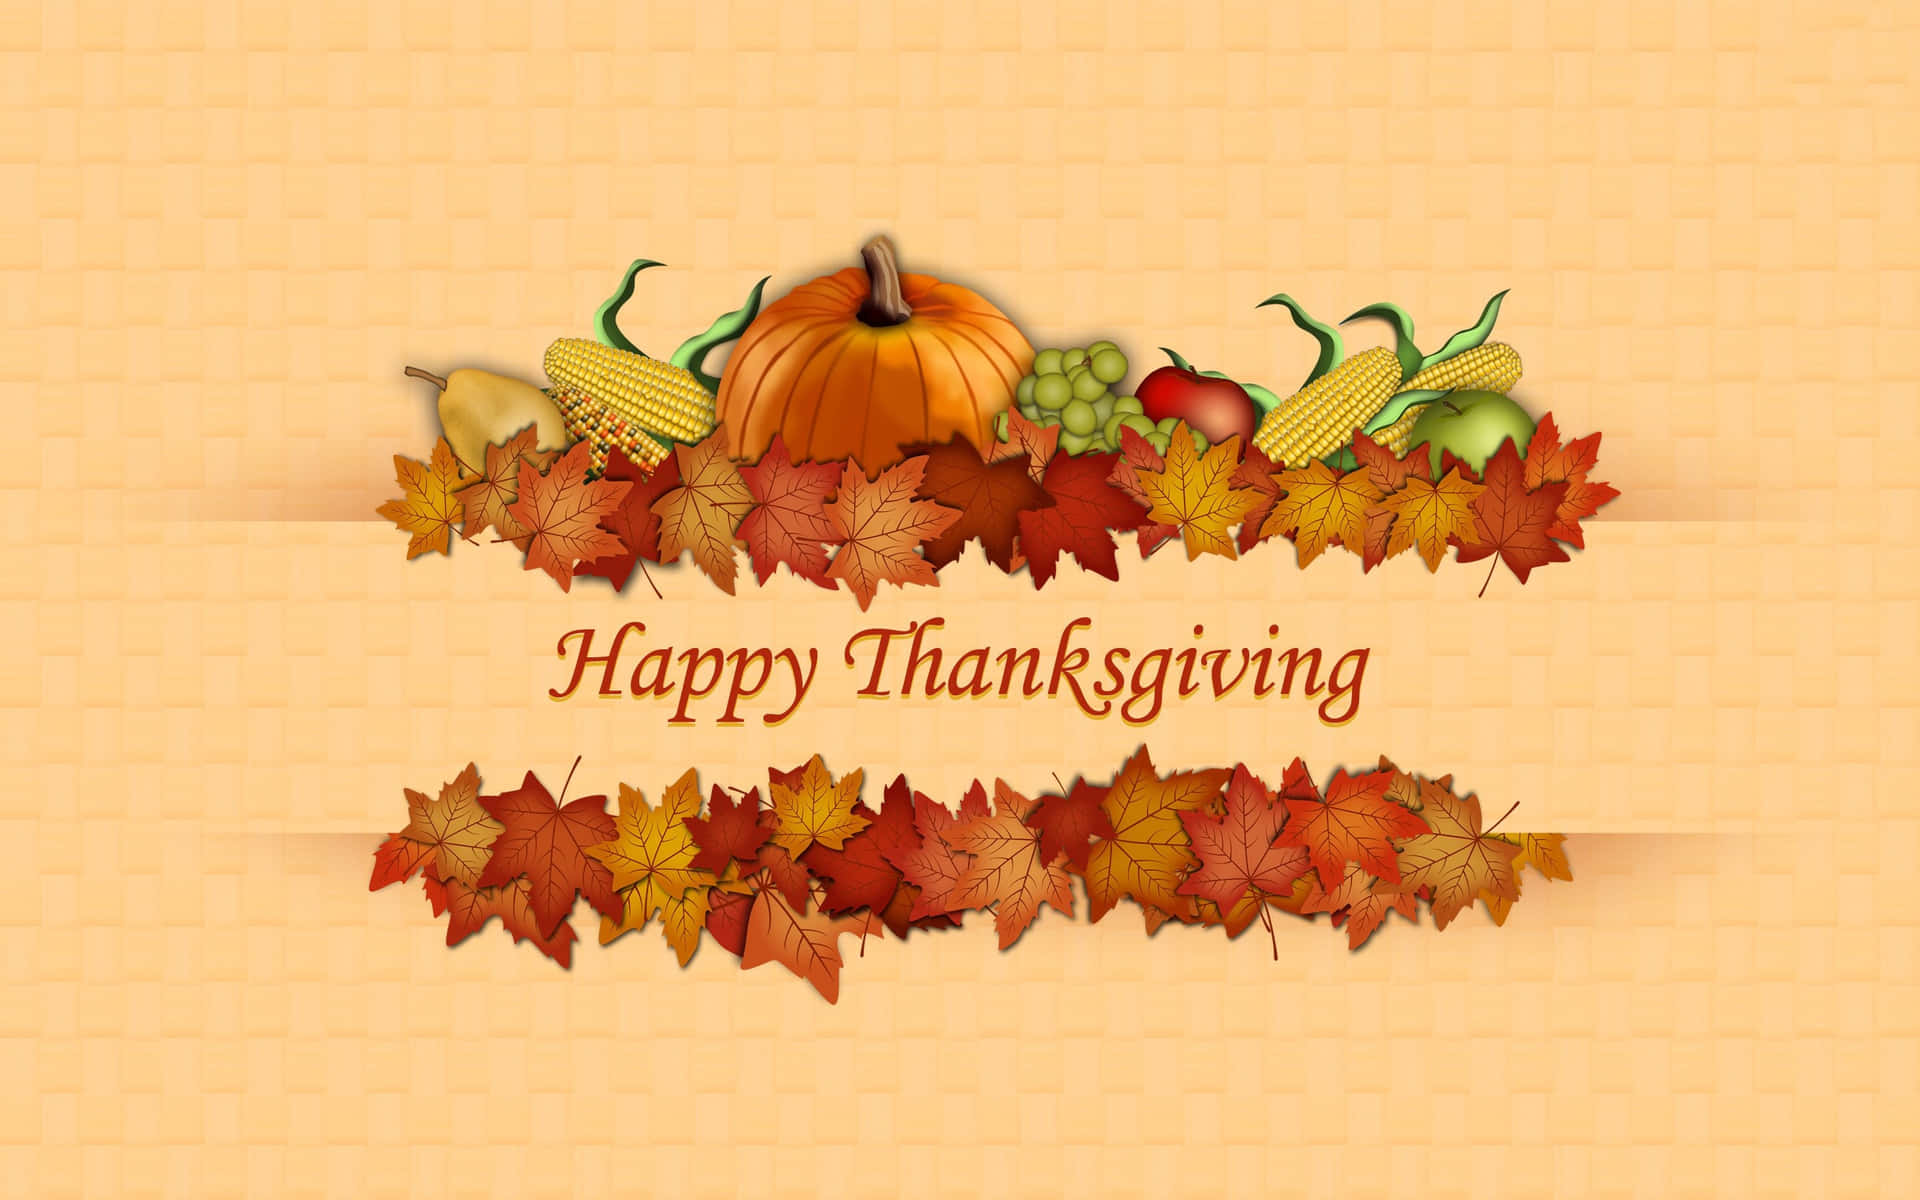 Pumpkins And Maple Leaves Happy Thanksgiving Card Wallpaper